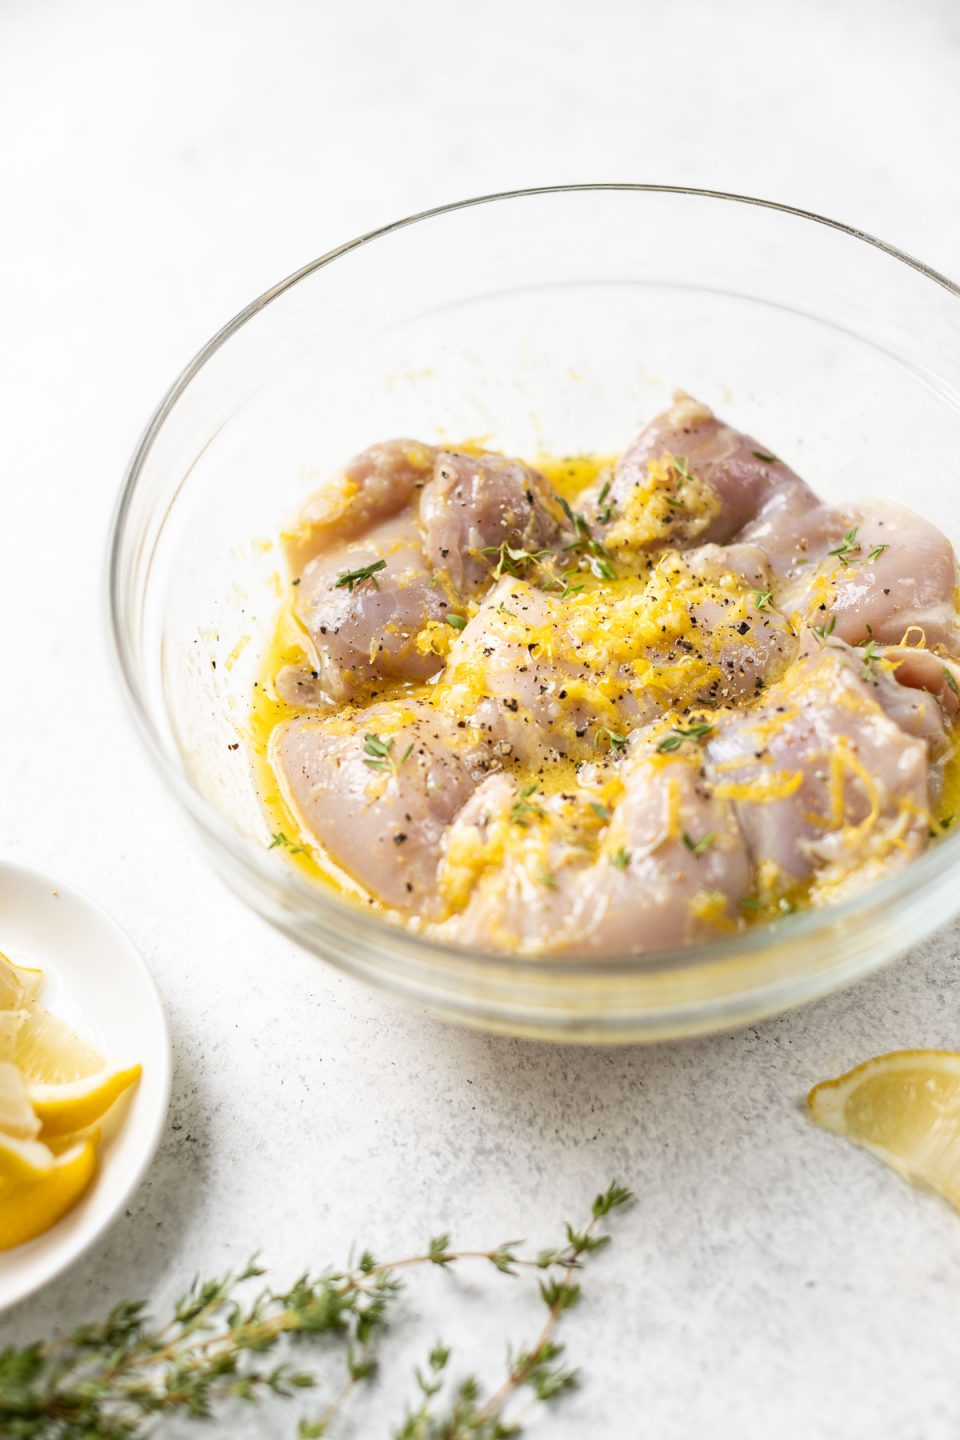 Side angle of chicken thighs marinating in the lemon garlic marinade in a glass mixing bowl. The mixing bowl sits atop a white surface with lemon wedges & sprigs of fresh thyme.